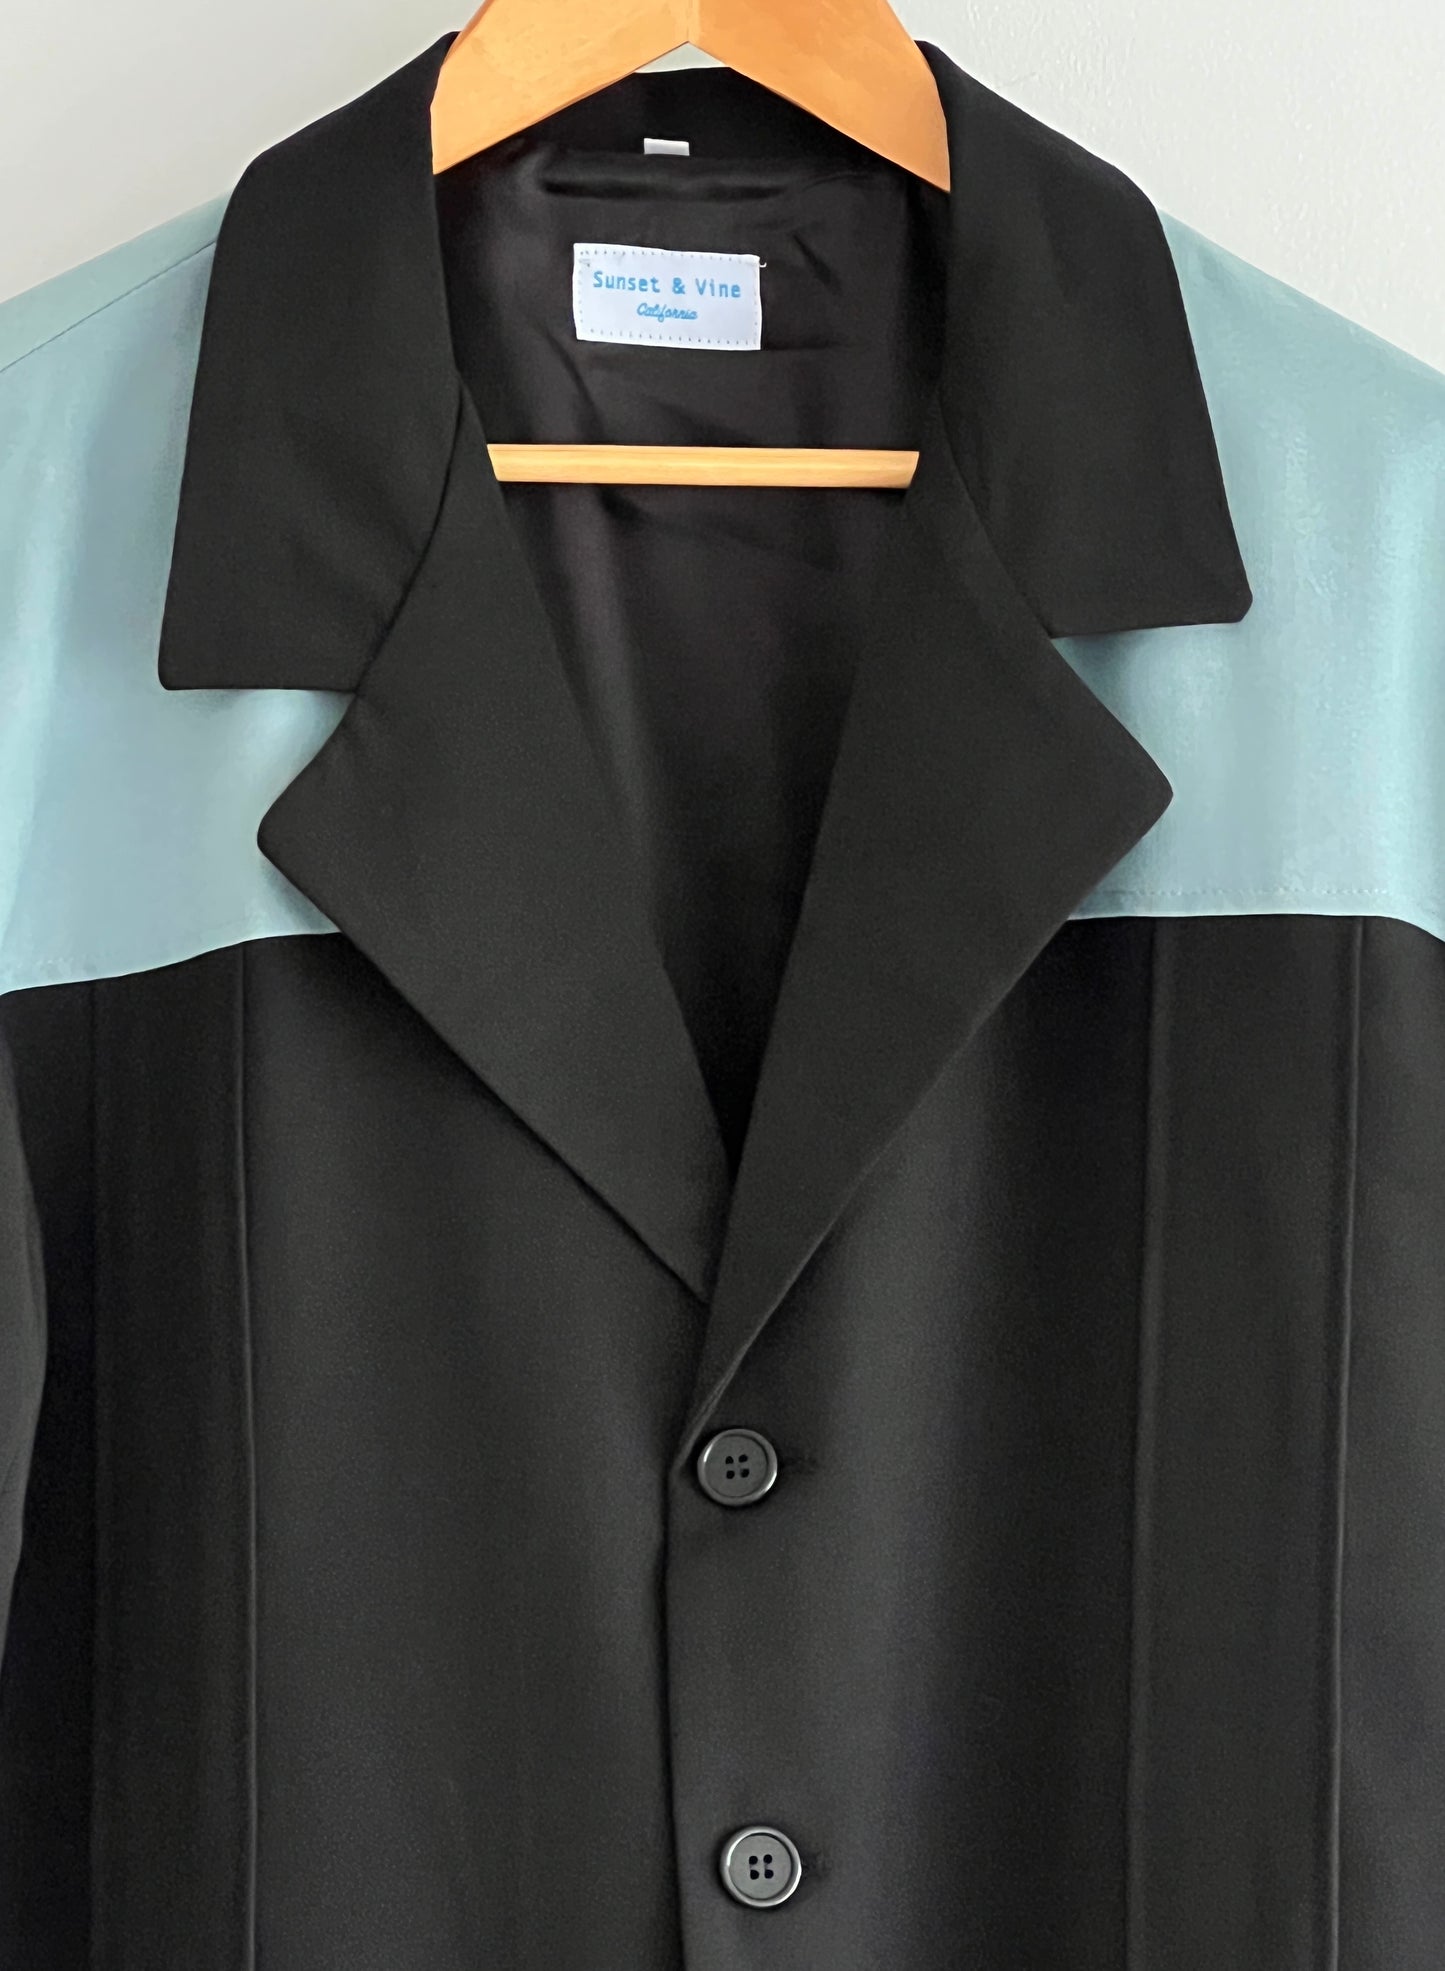 Vintage 1950s style Mans Hollywood resort two tone powder blue and black jacket